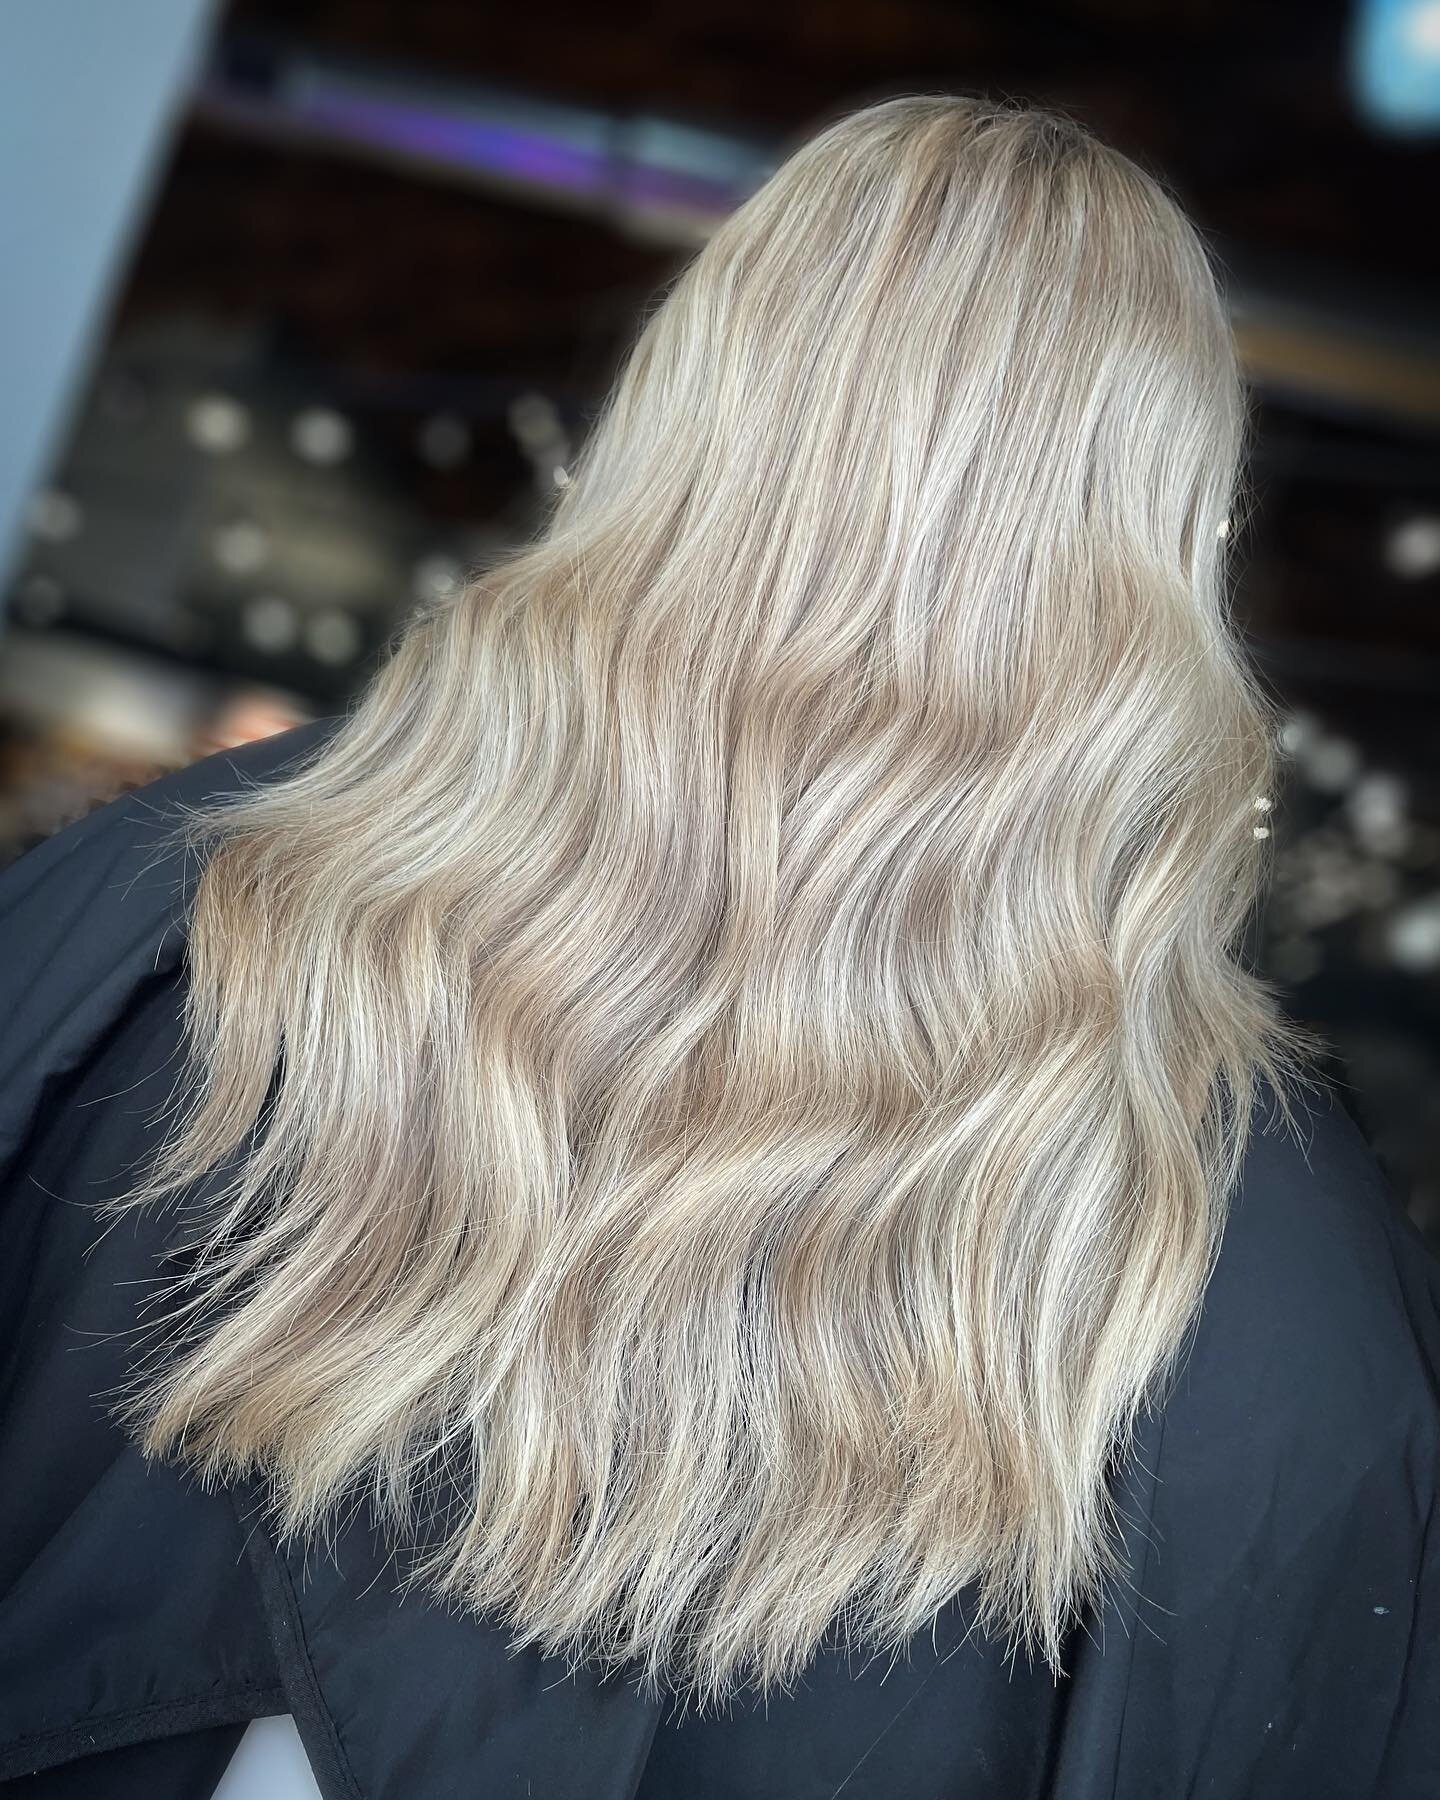 V A N I L L A  I C E 🧁❄️ #blondeaf #vanillablonde #iceicebaby #lorealpro #shadeseq #redken # #colorspecialist #stlhairstylist #stlcolorist